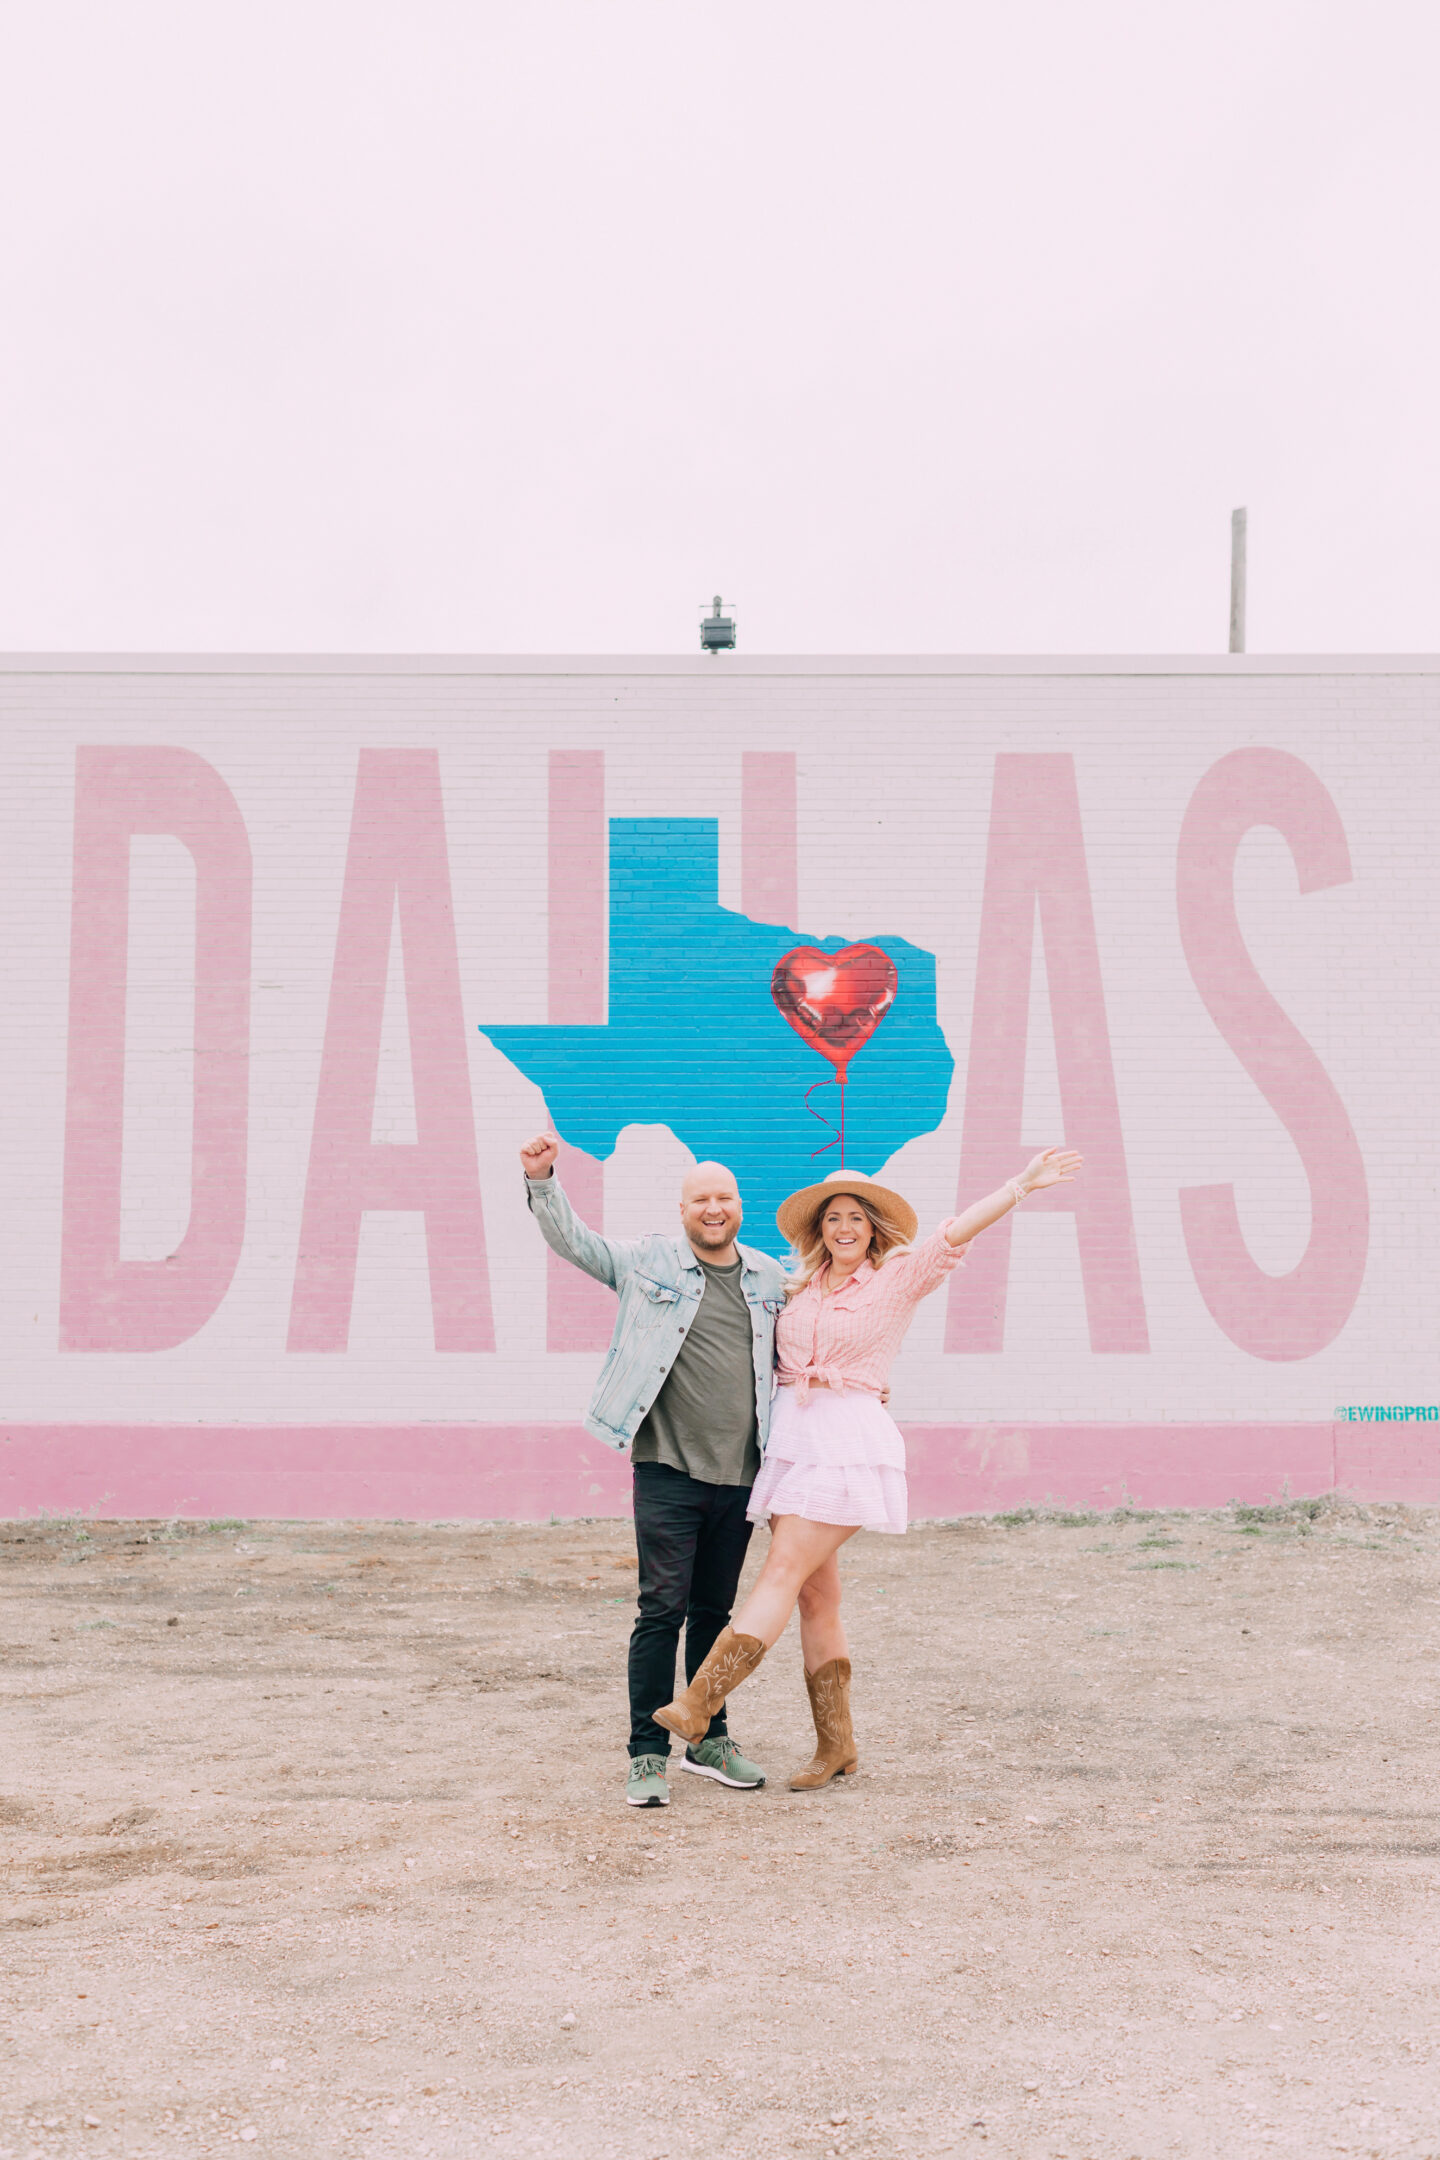 Dallas Mural DD Playground, Instagrammable Places in Dallas